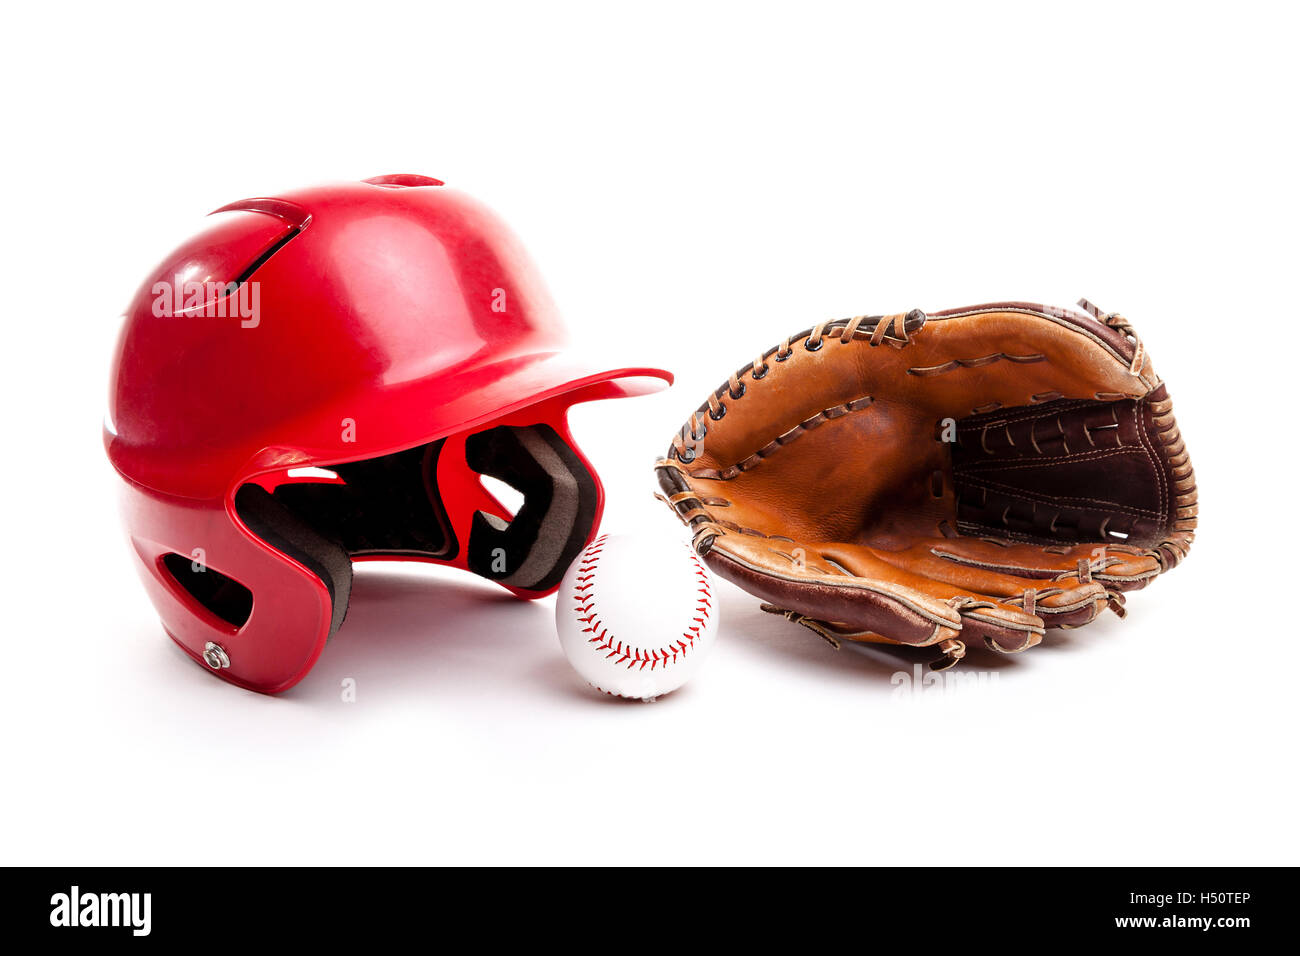 Baseball equipment consisting of red helmet, leather glove and baseball. Isolated on white background. Stock Photo